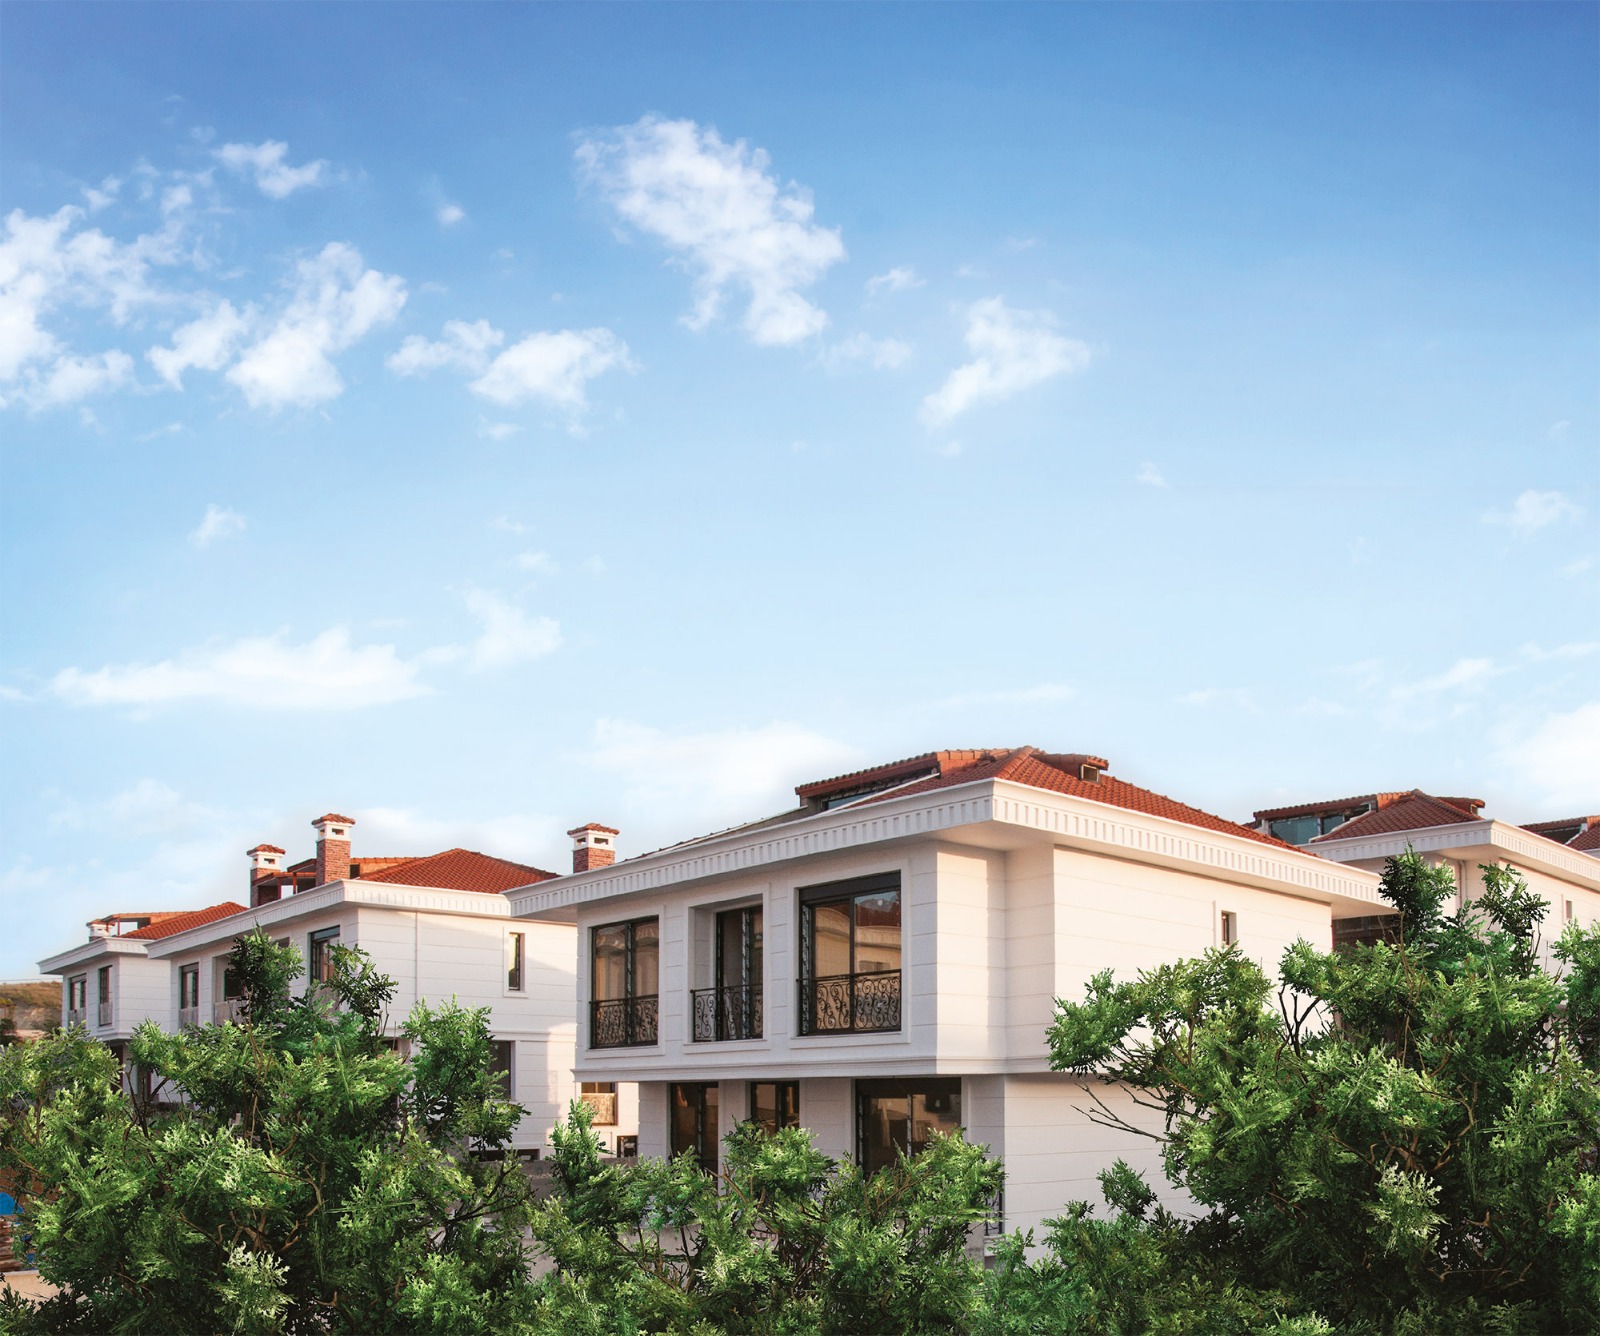 Luxury Villas with Stunning Views of Marmara Sea The Perfect Atmosphere for Living in Istanbul